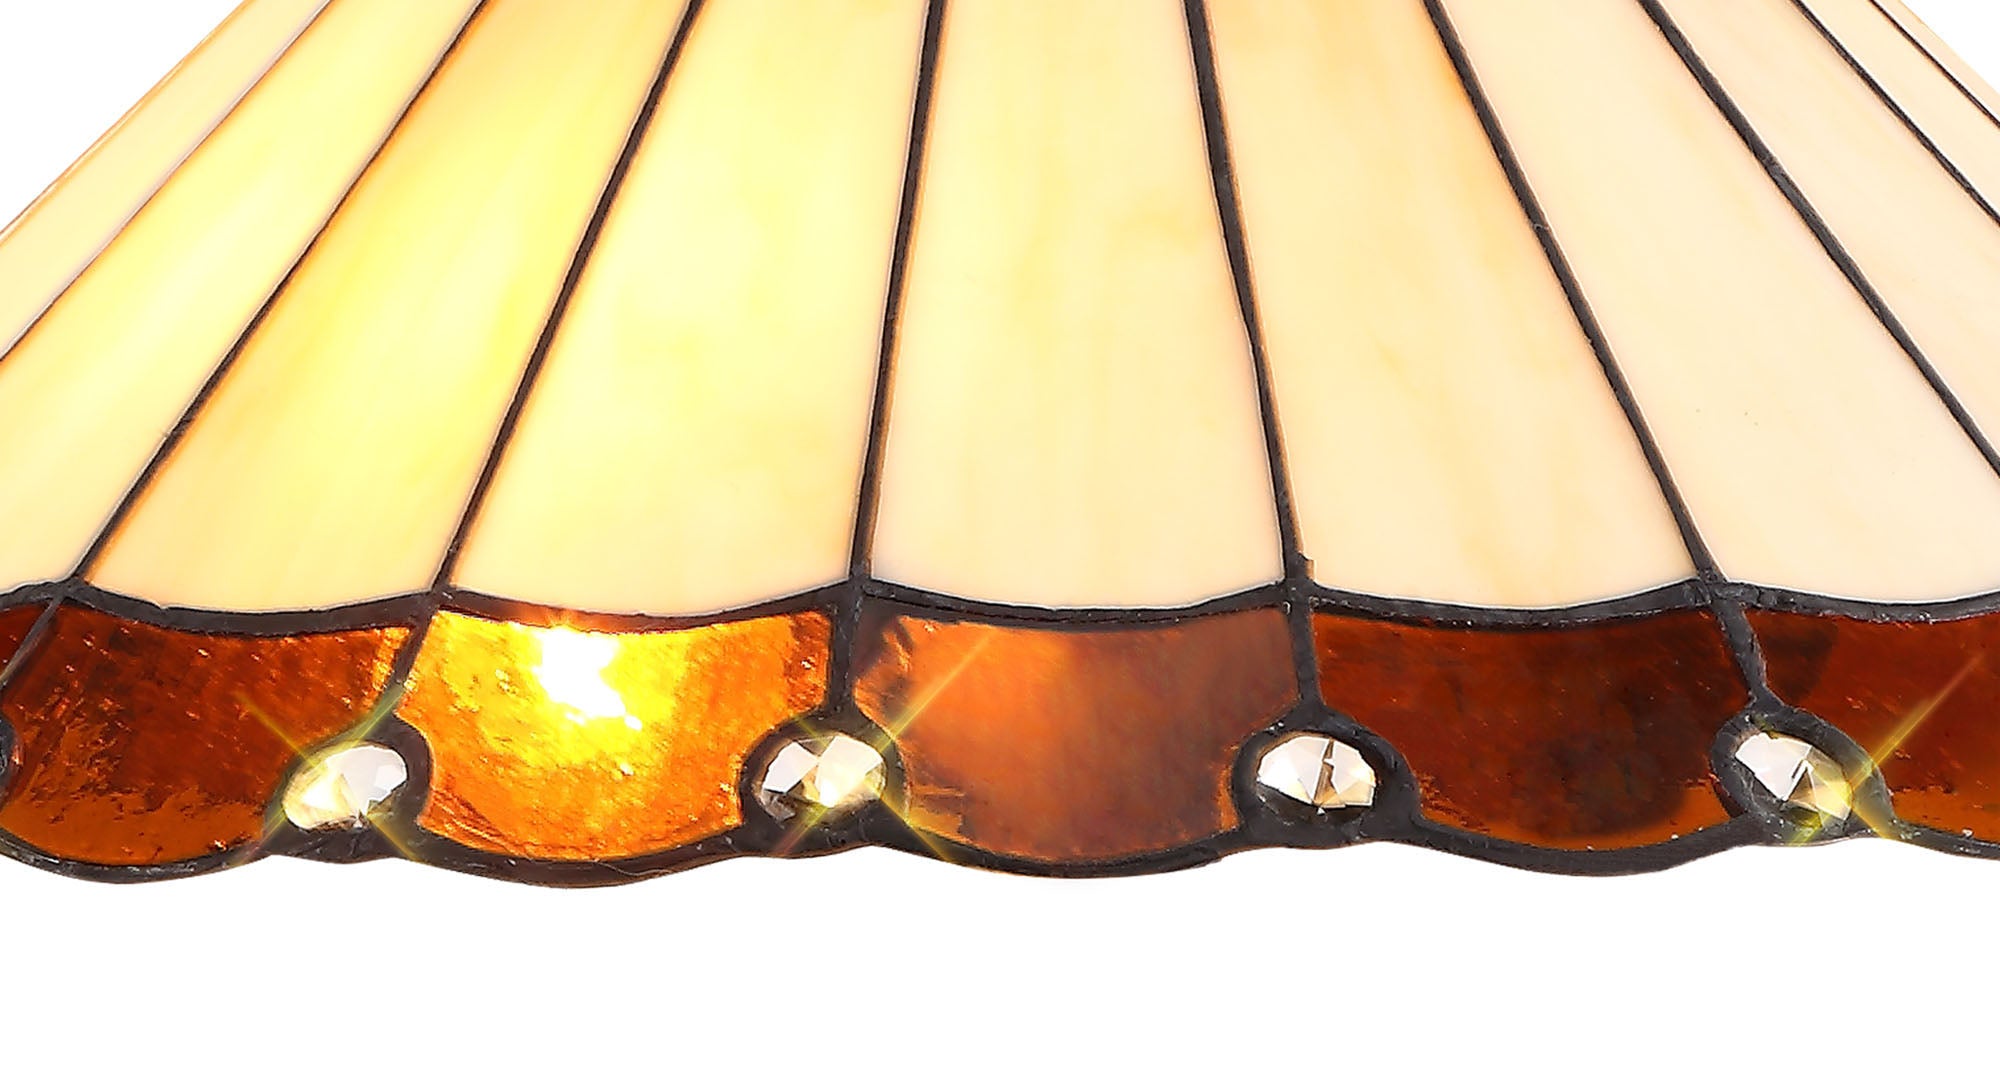 Umbrella Tiffany 40cm Shade Only Suitable For Pendant/Ceiling/Table Lamp, Amber/Crealm/Crystal